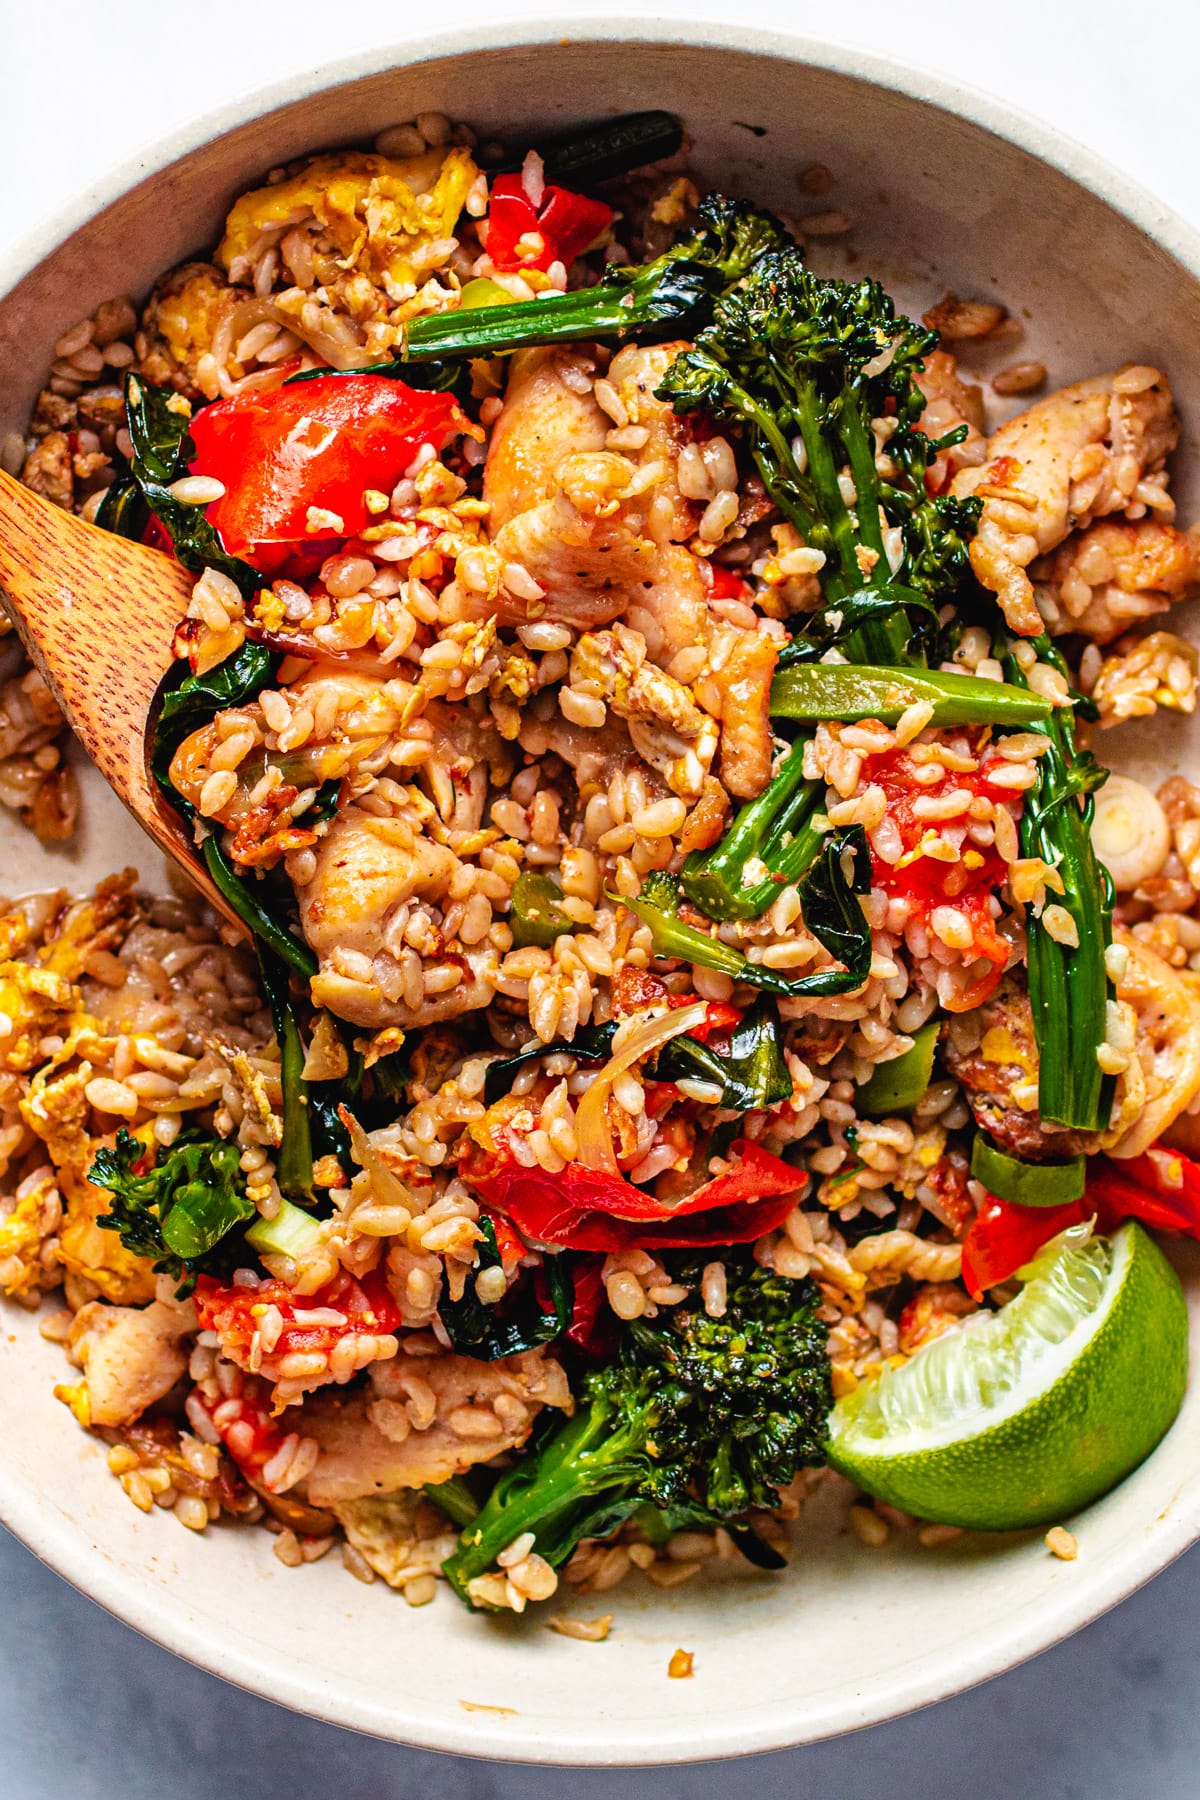 Low Carb Thai Chicken Fried Rice Recipe is Paleo, Keto friendly from I Heart Umami.